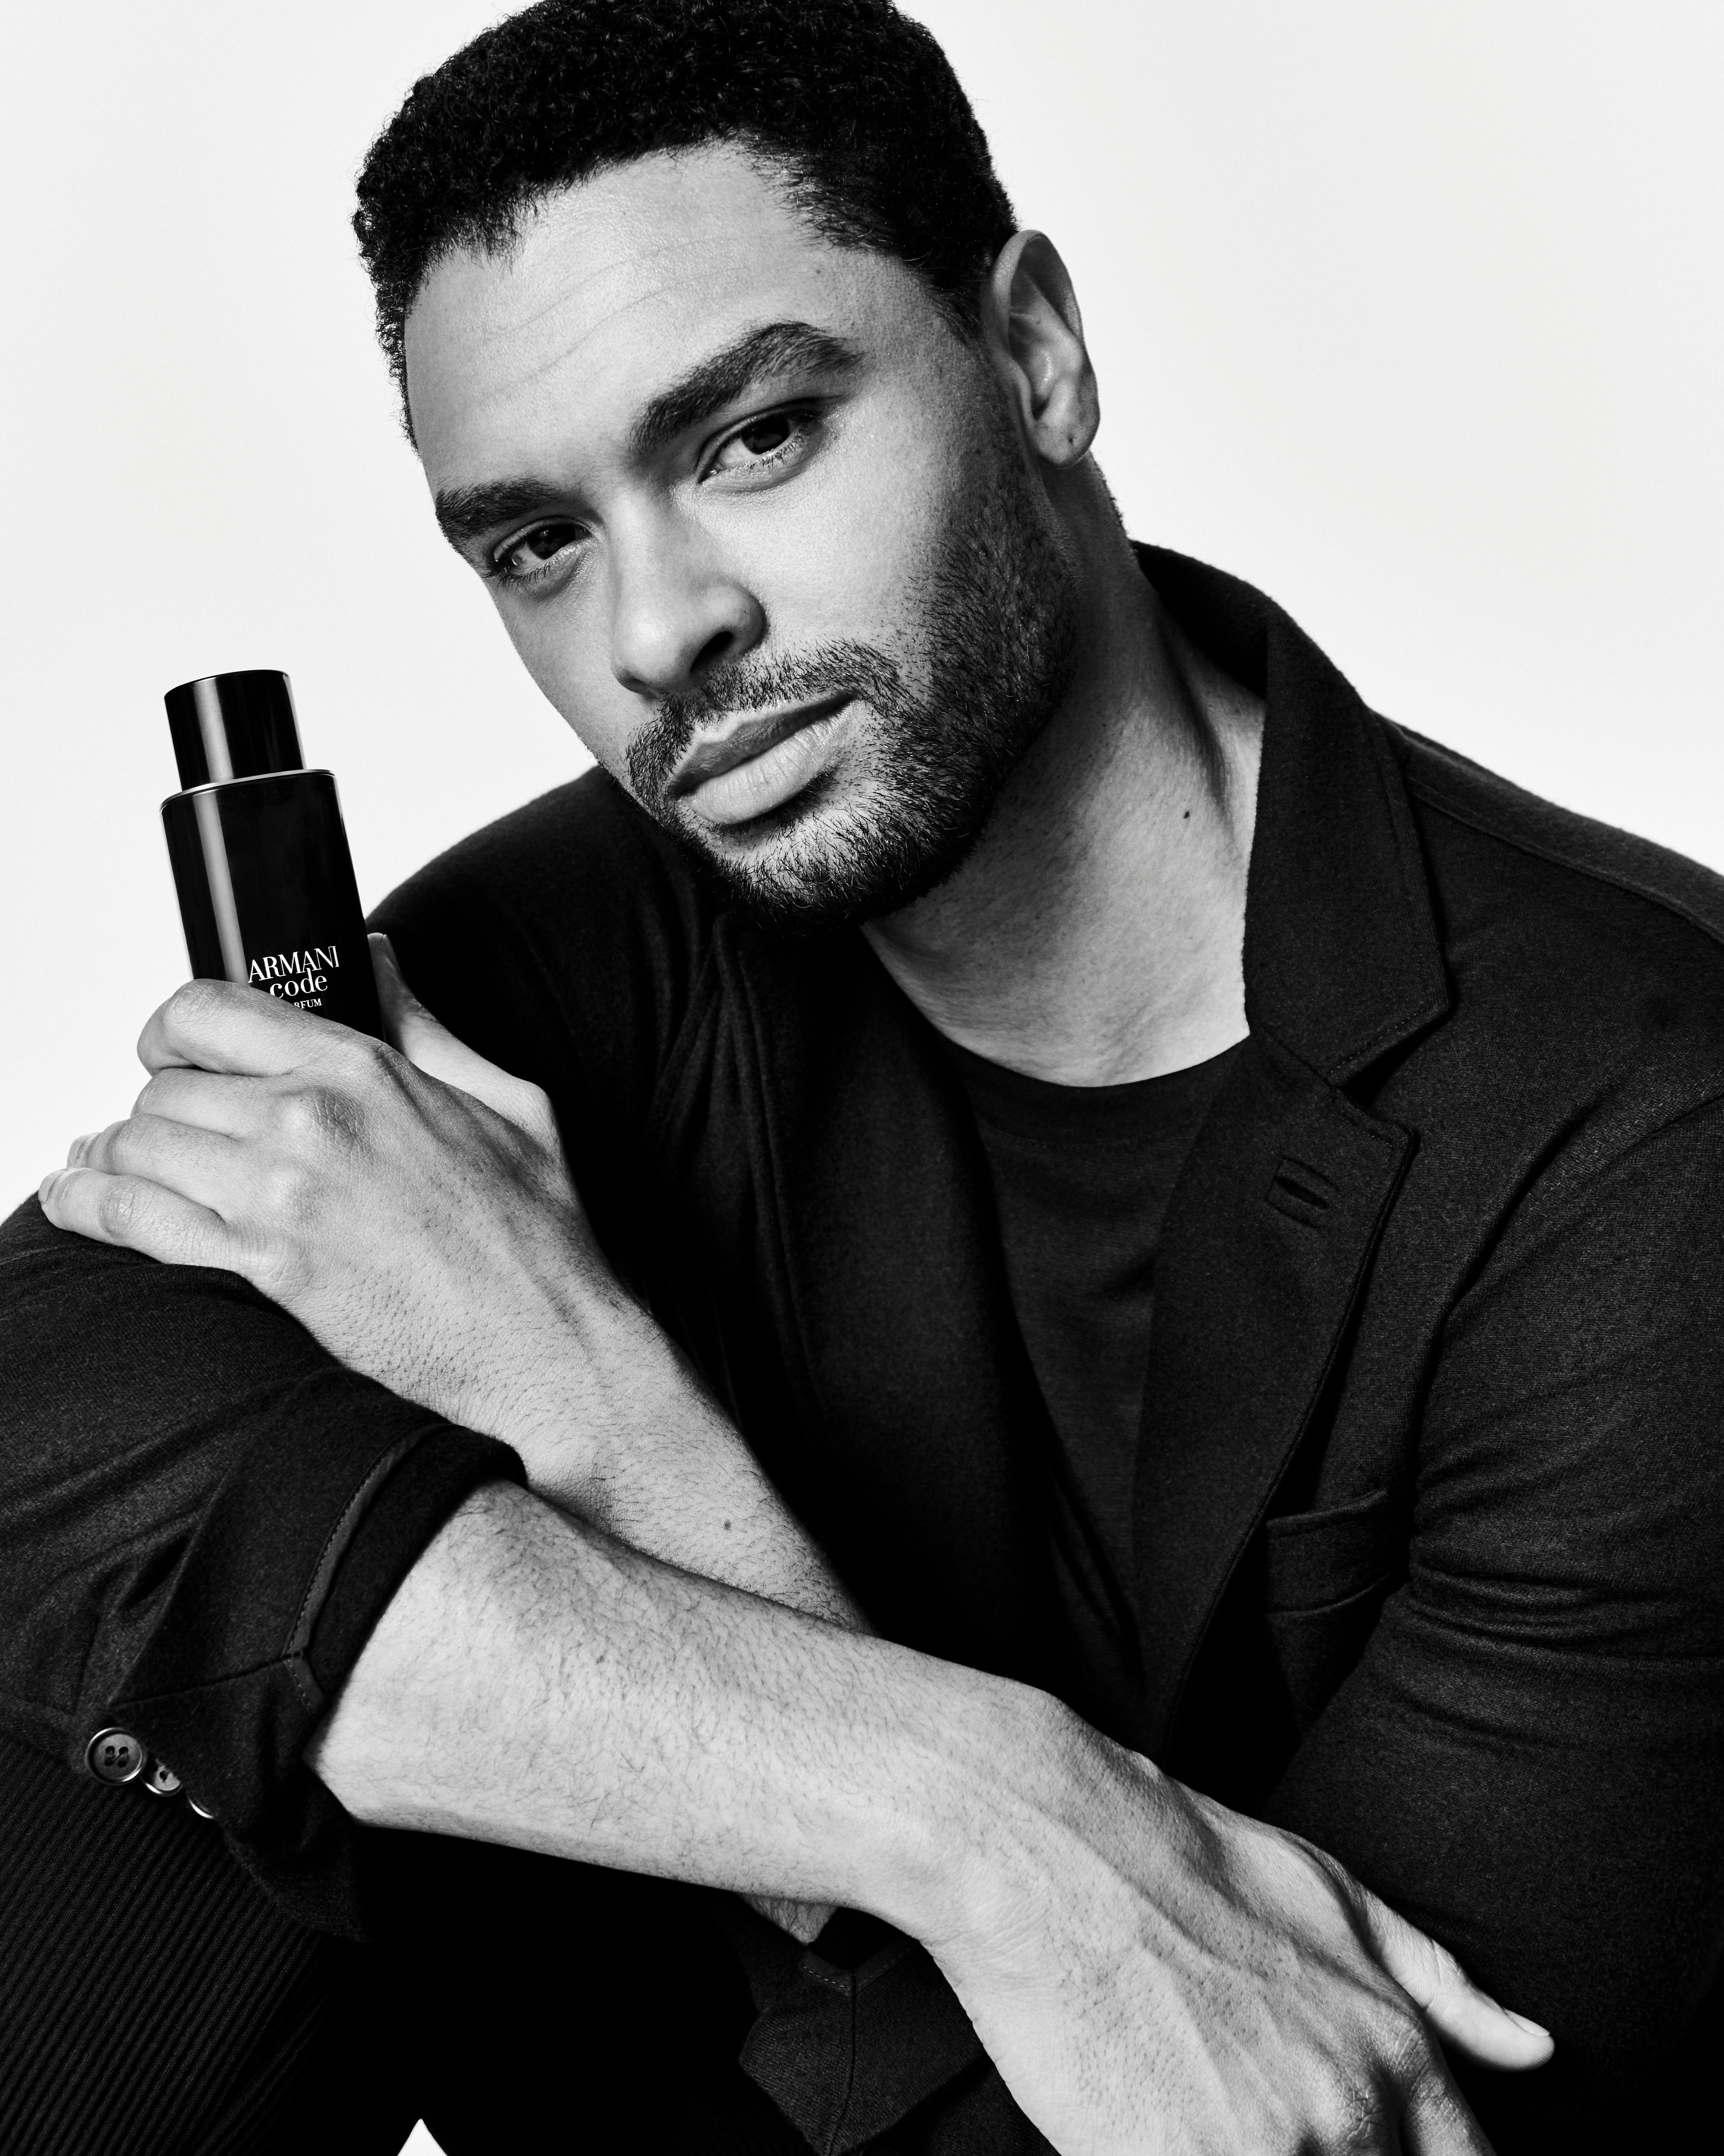 Regé-Jean Page is the New Face of Armani Code